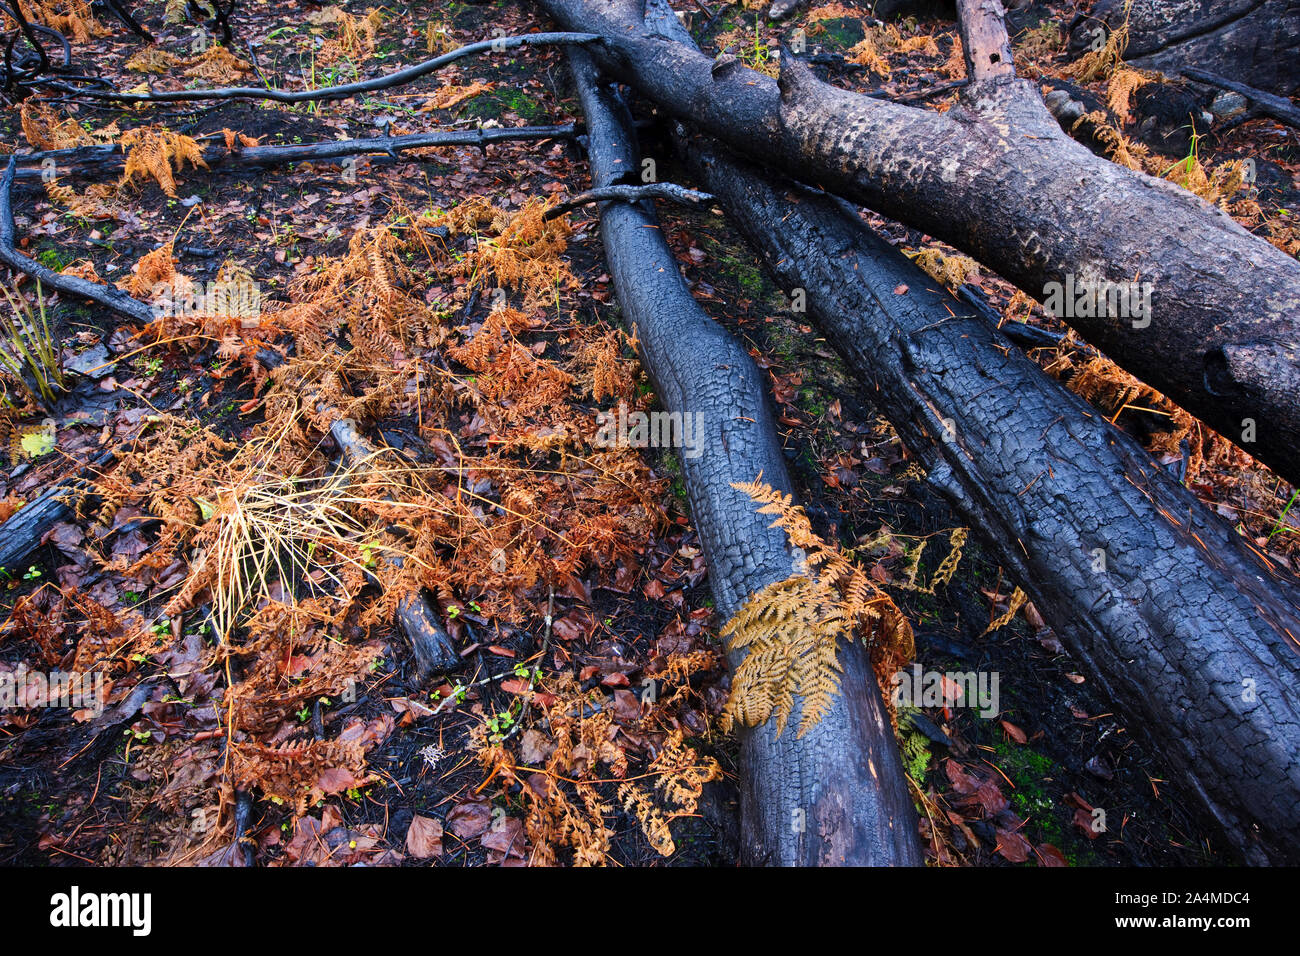 Scorched tree trunks and forest floor after fire Stock Photo